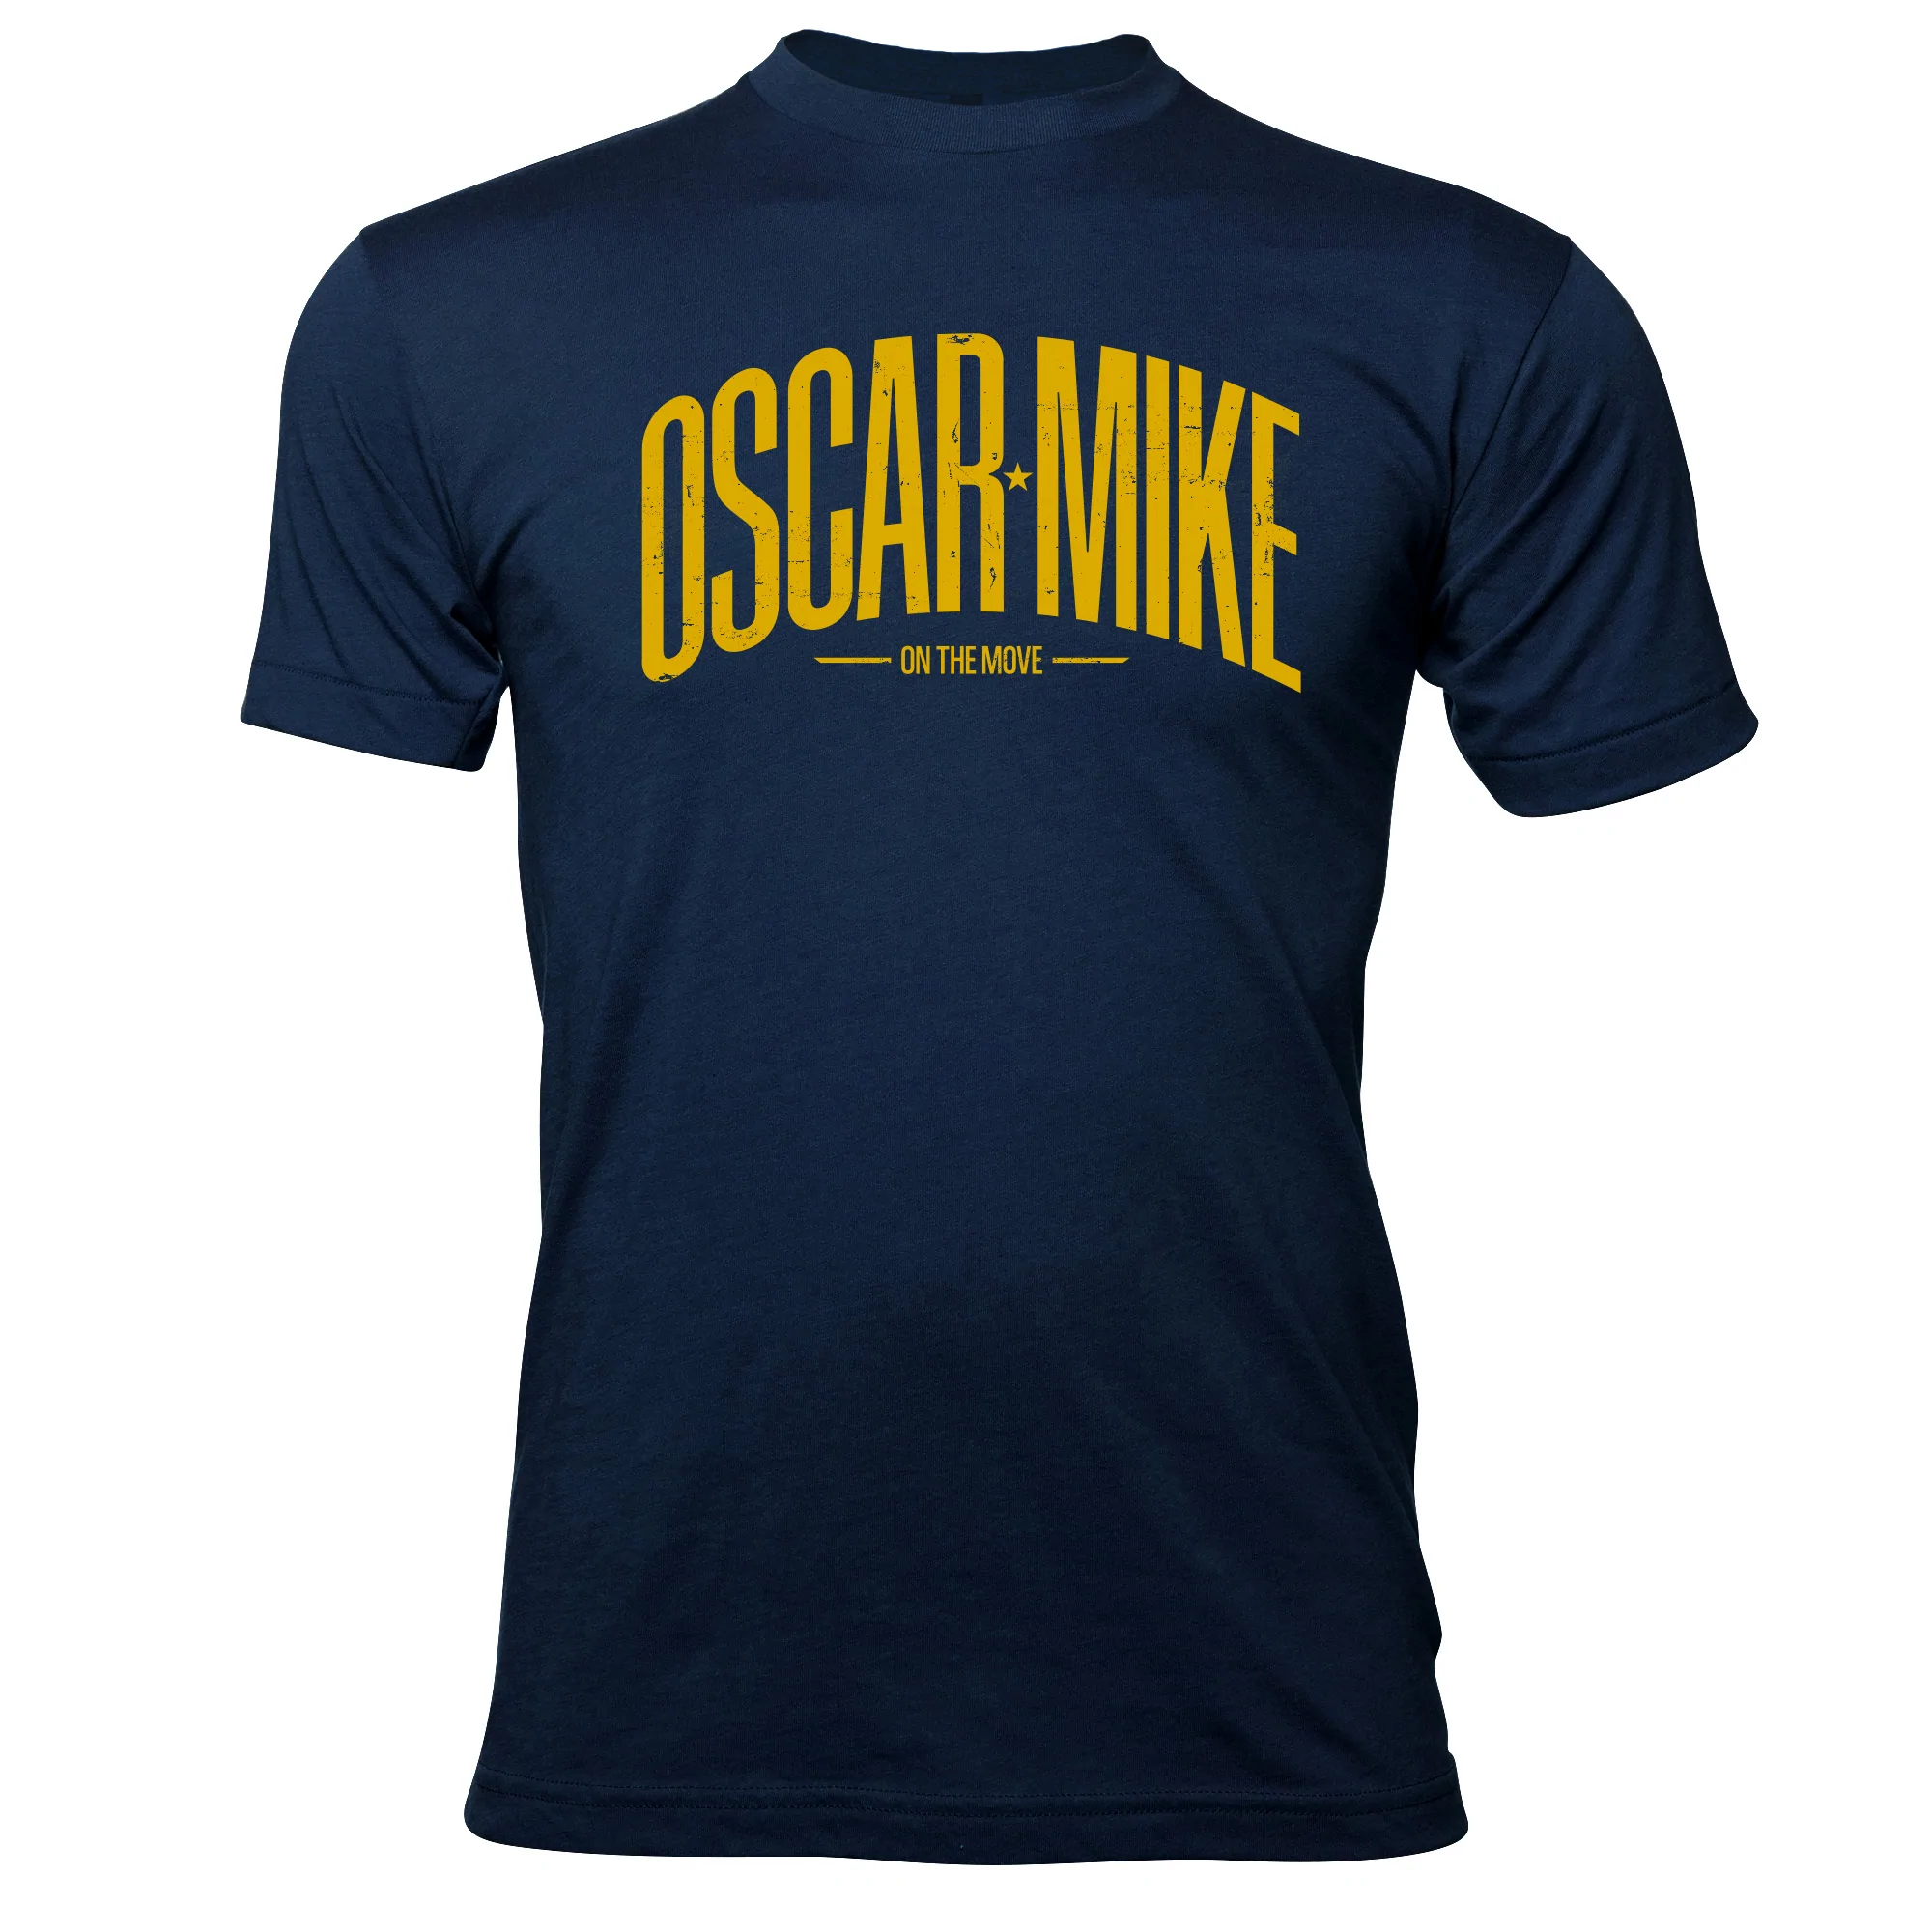 Oscar Mike Men's Arched Logo Tee